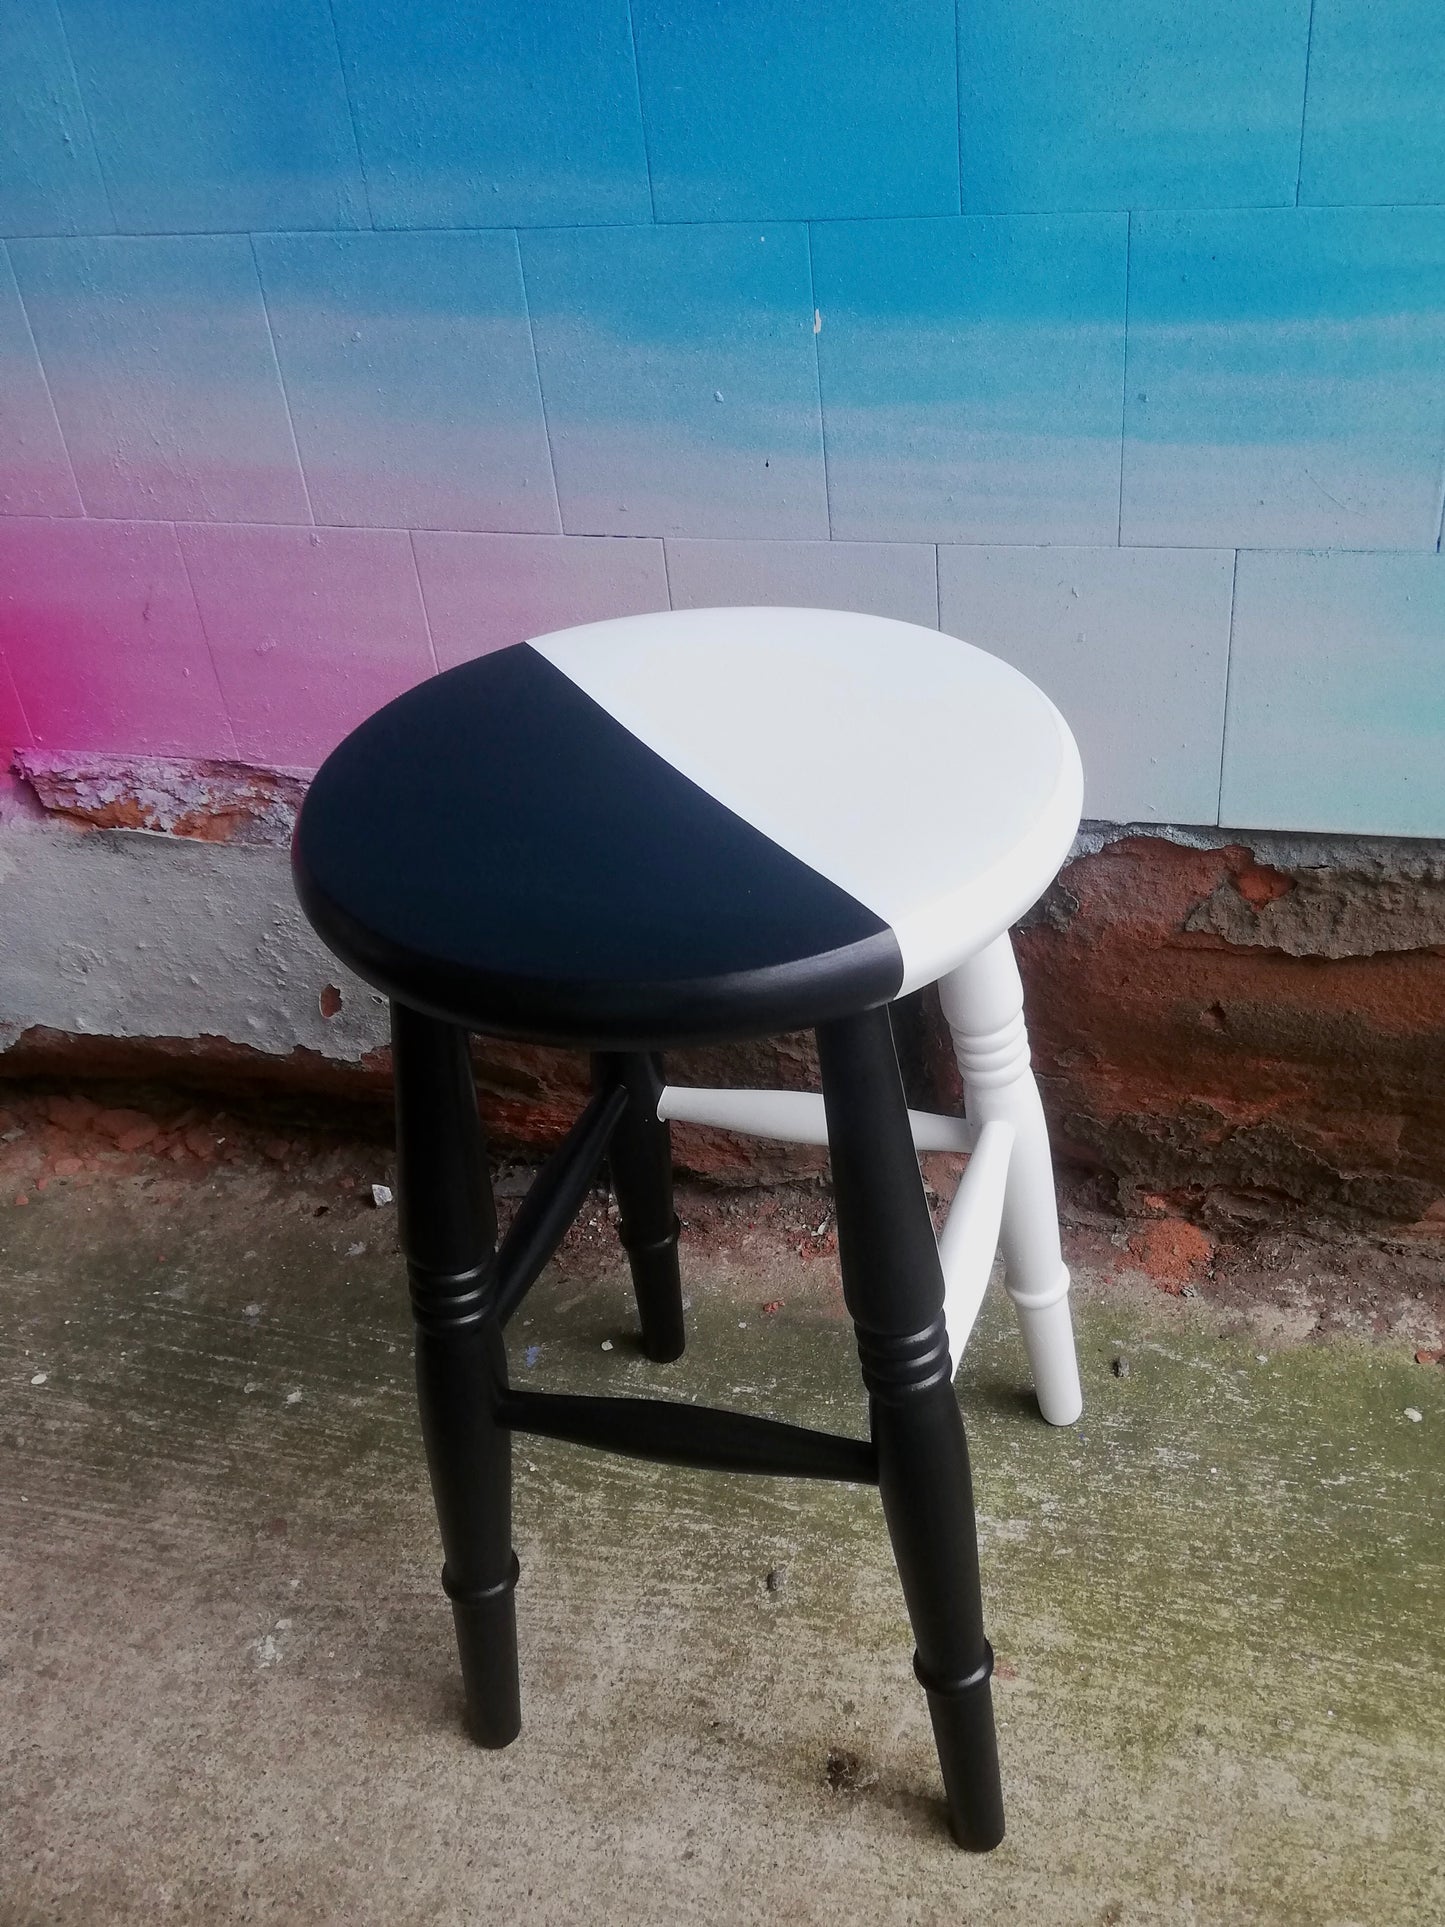 Vintage round stool available for painting